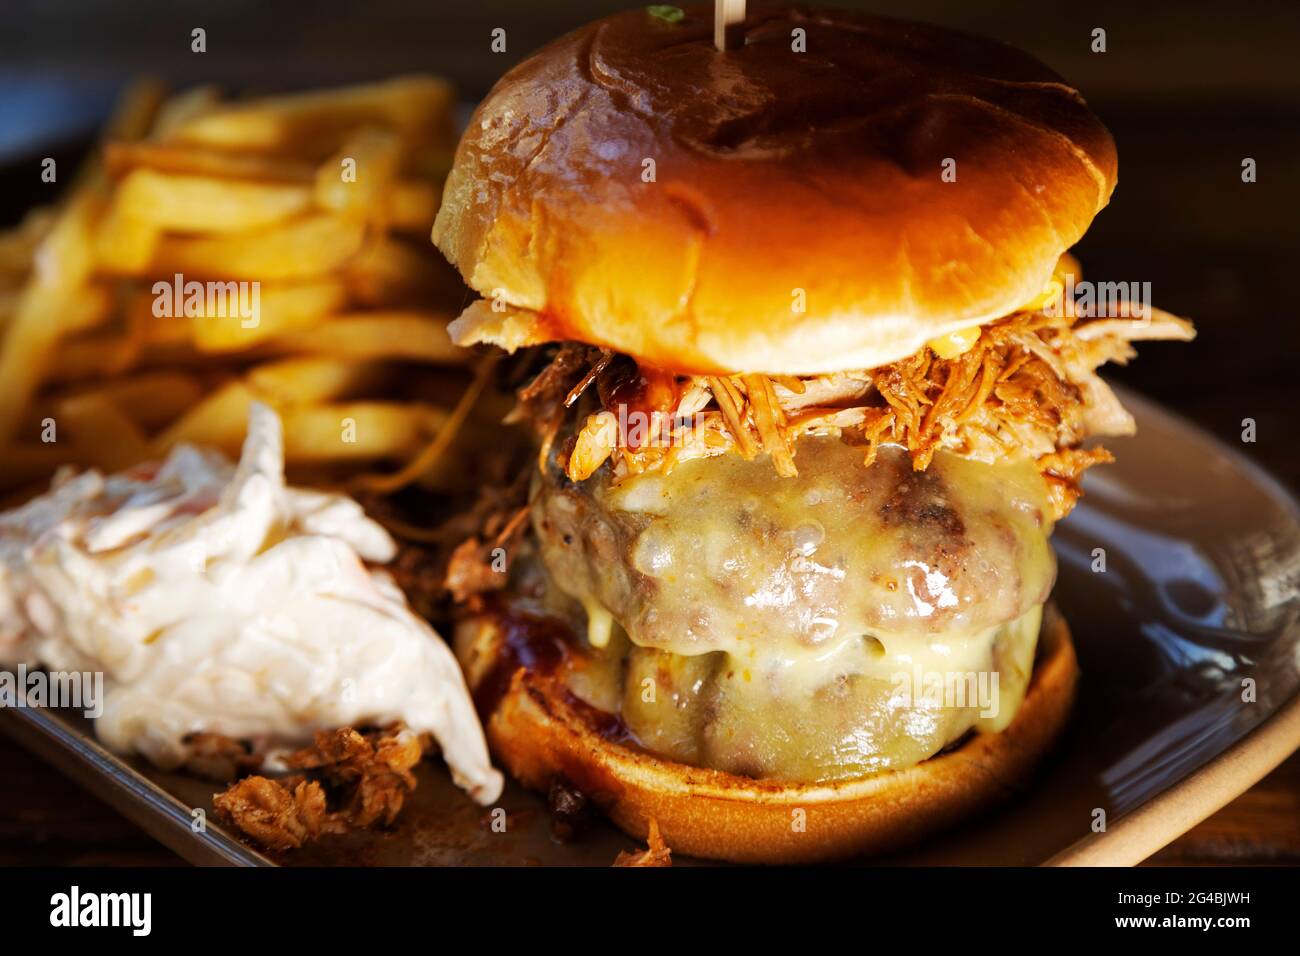 Burger in a brioche bun served with fried and 'slaw. The Burger is topped with melted cheese and shredded pulled pork. Stock Photo